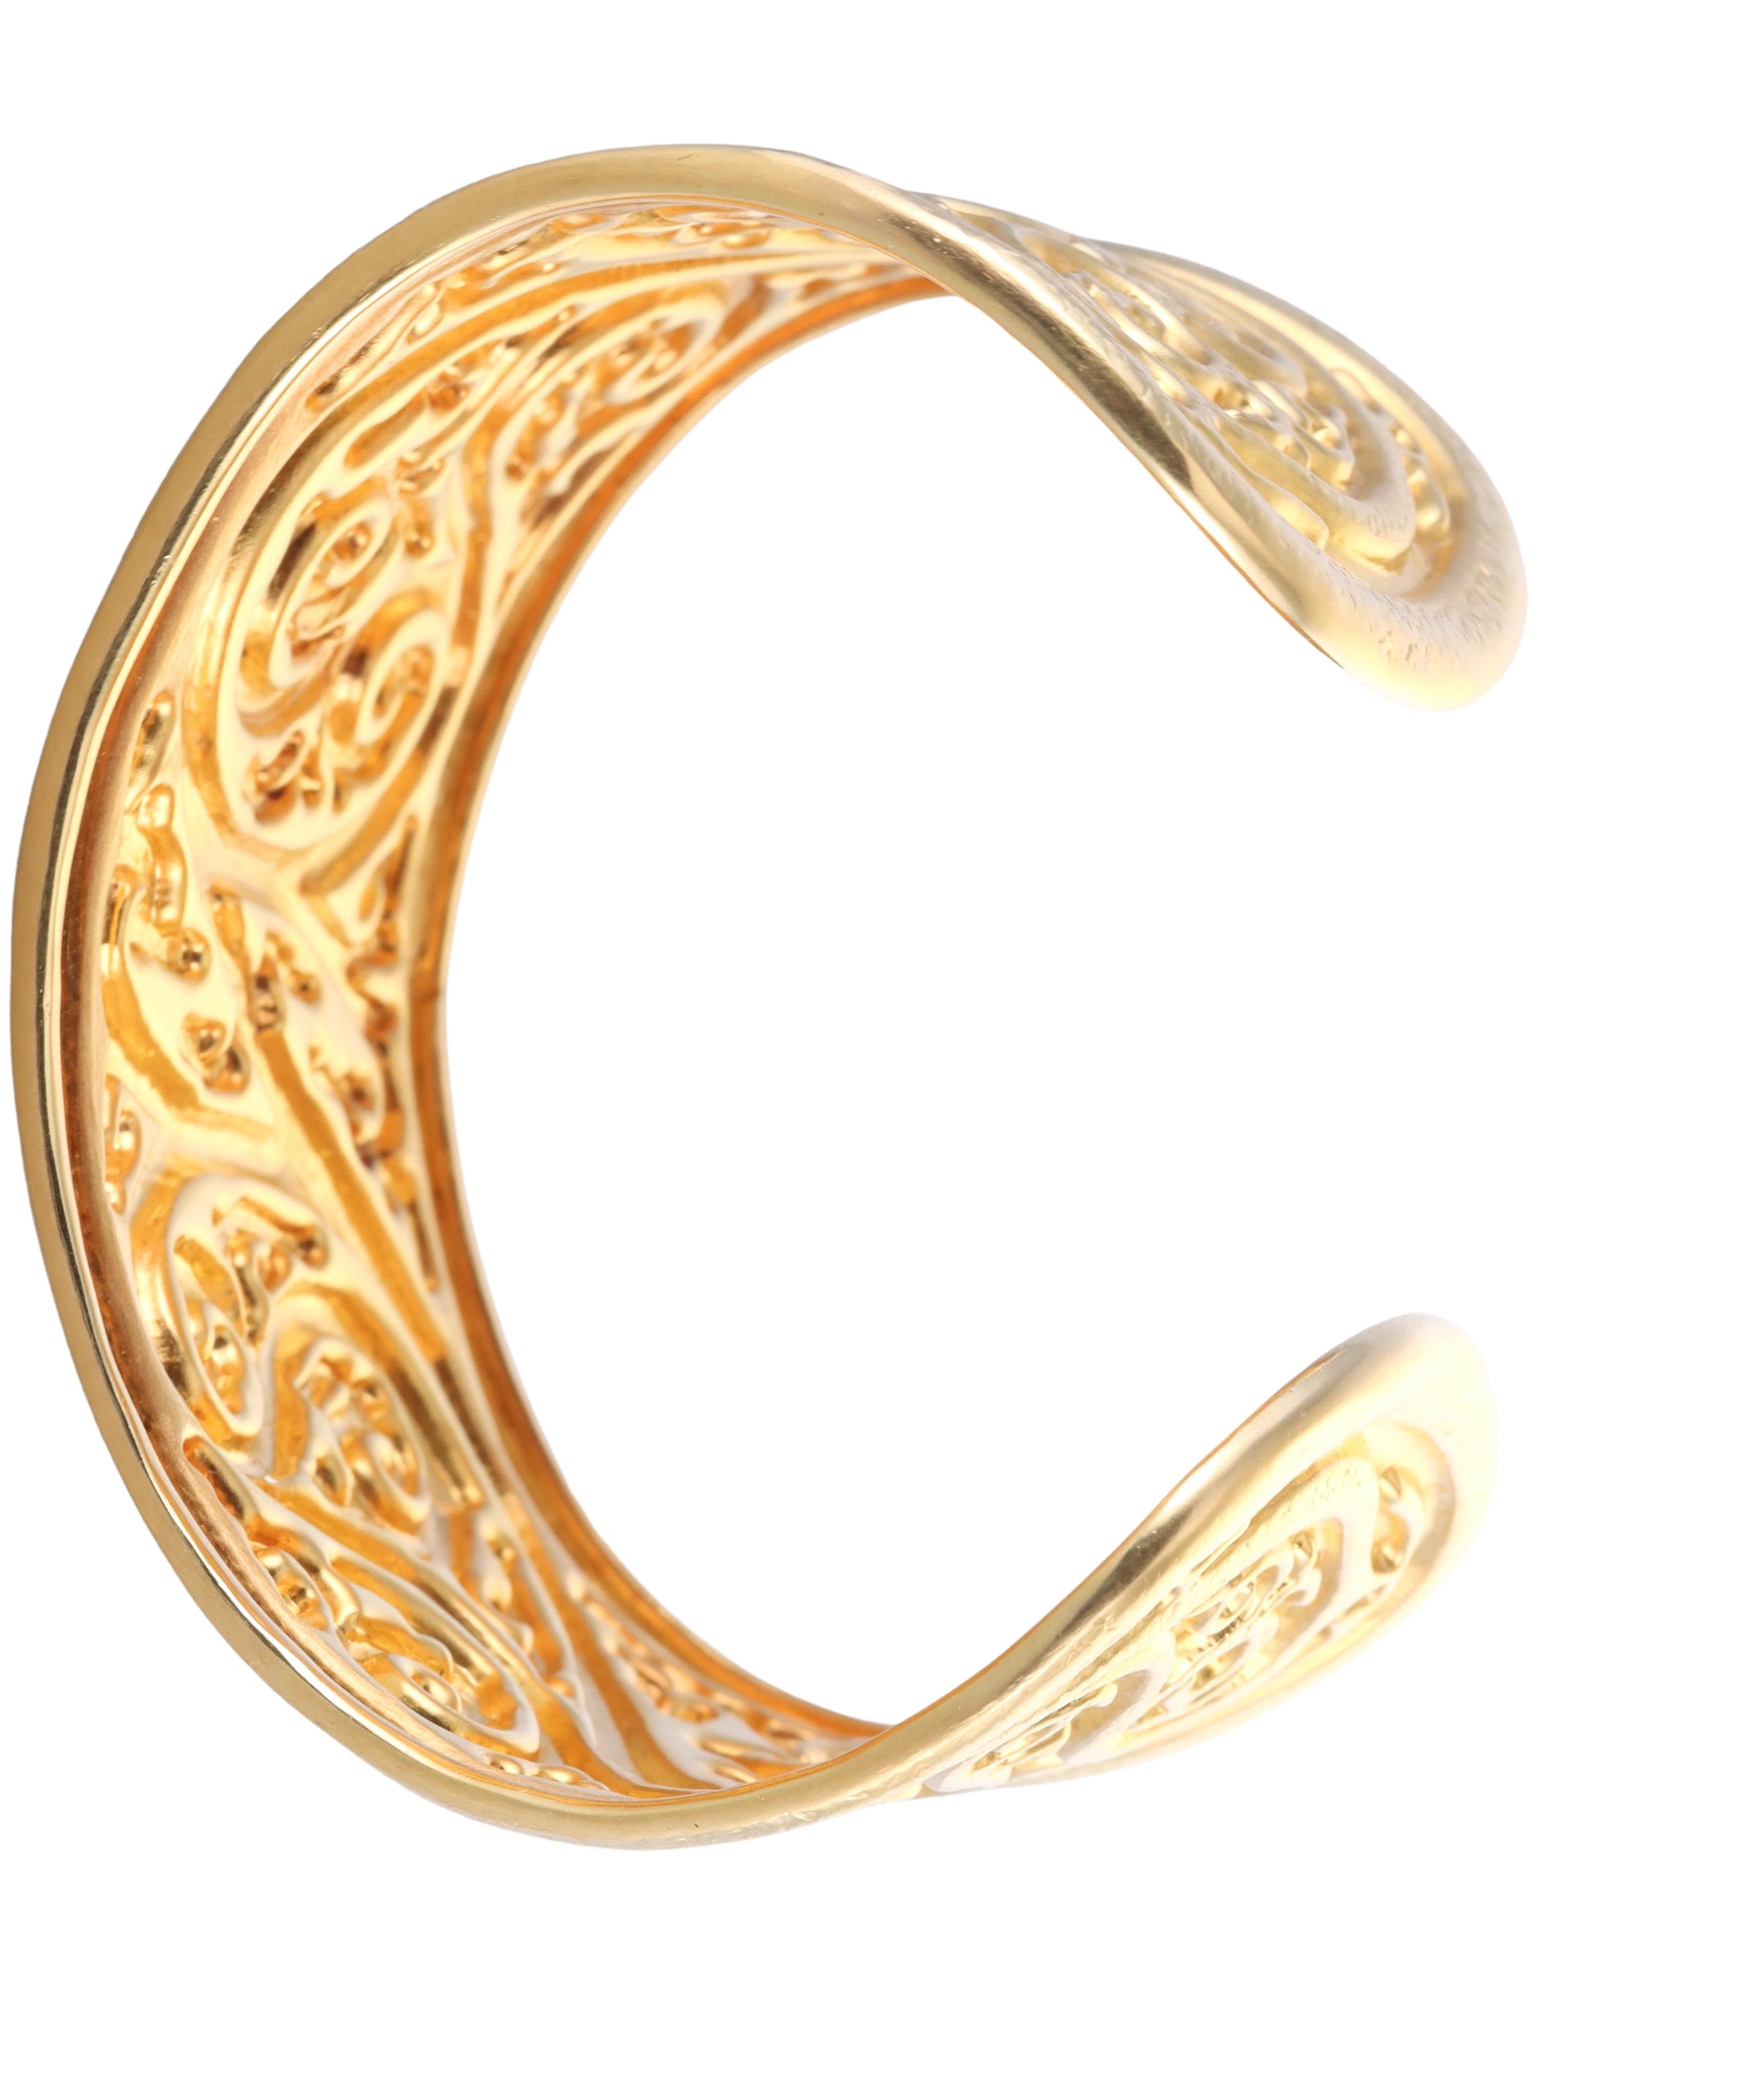 Gorgeous 18k yellow gold cuff bracelet, crafted by iconic Greek designer Ilias Lalaounis. The bracelet will fit an approximately 7.5-7.75